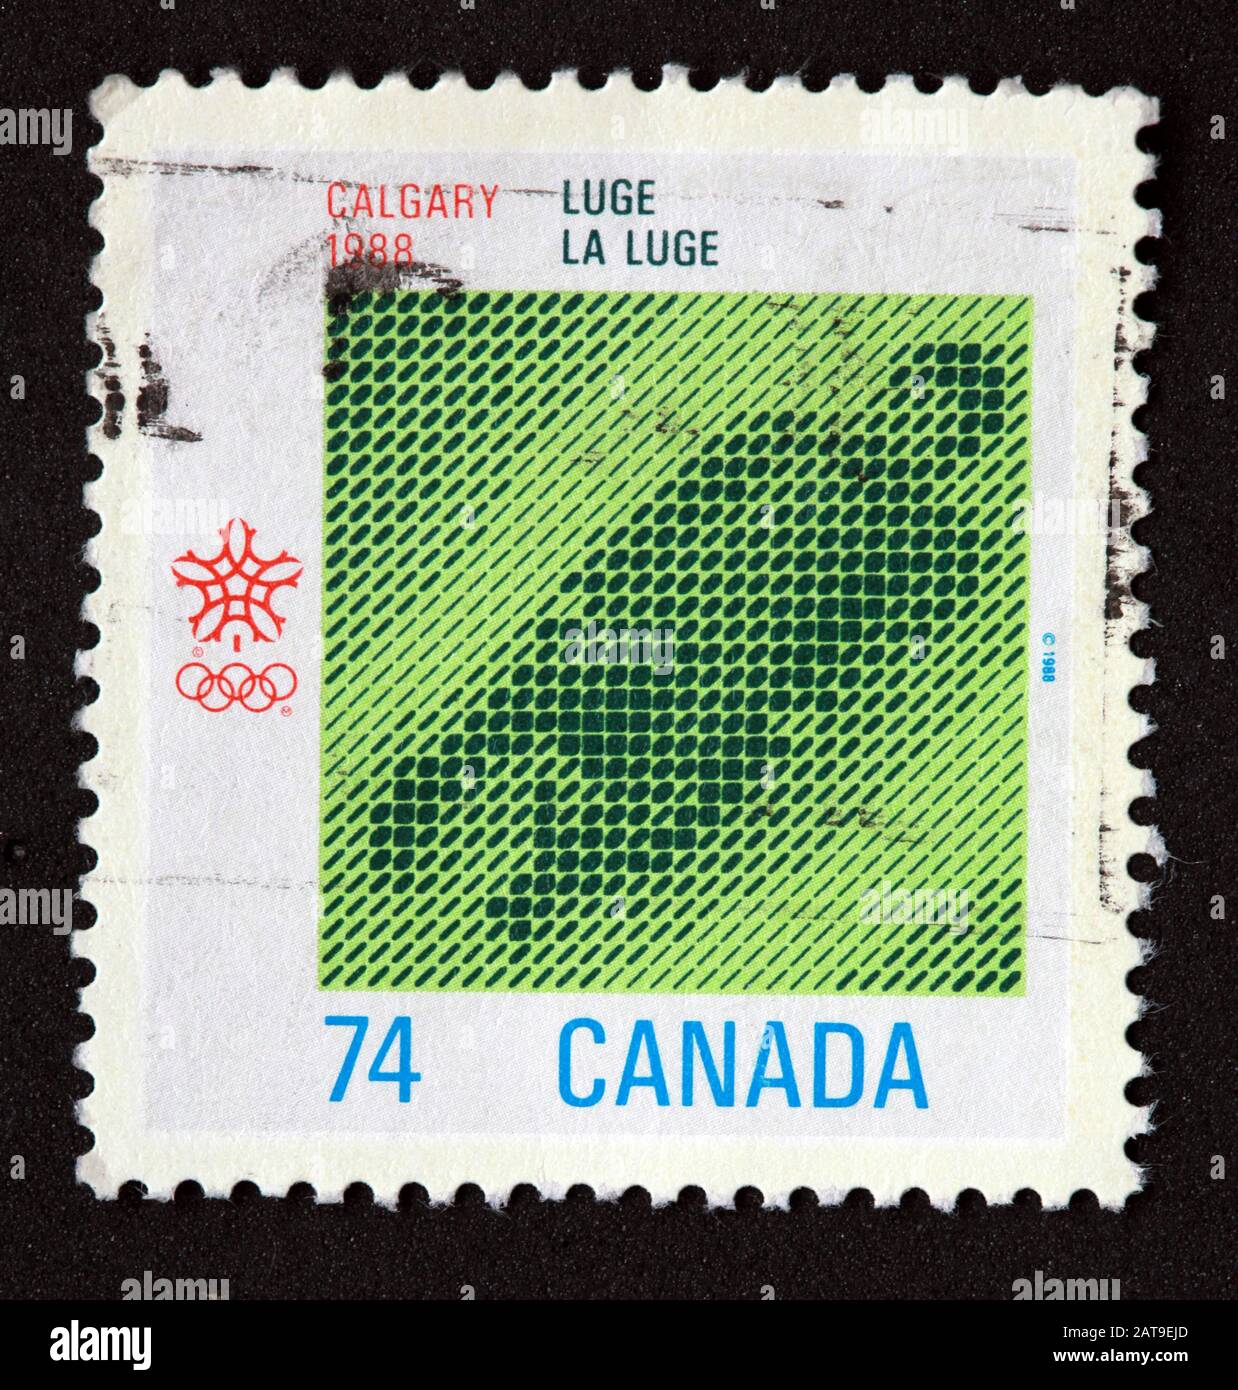 Canadian Stamp, Canada Stamp, Canada Post, usato Stamp, 1988, Calgary 1988, luge, la luge, 74, 74c Foto Stock